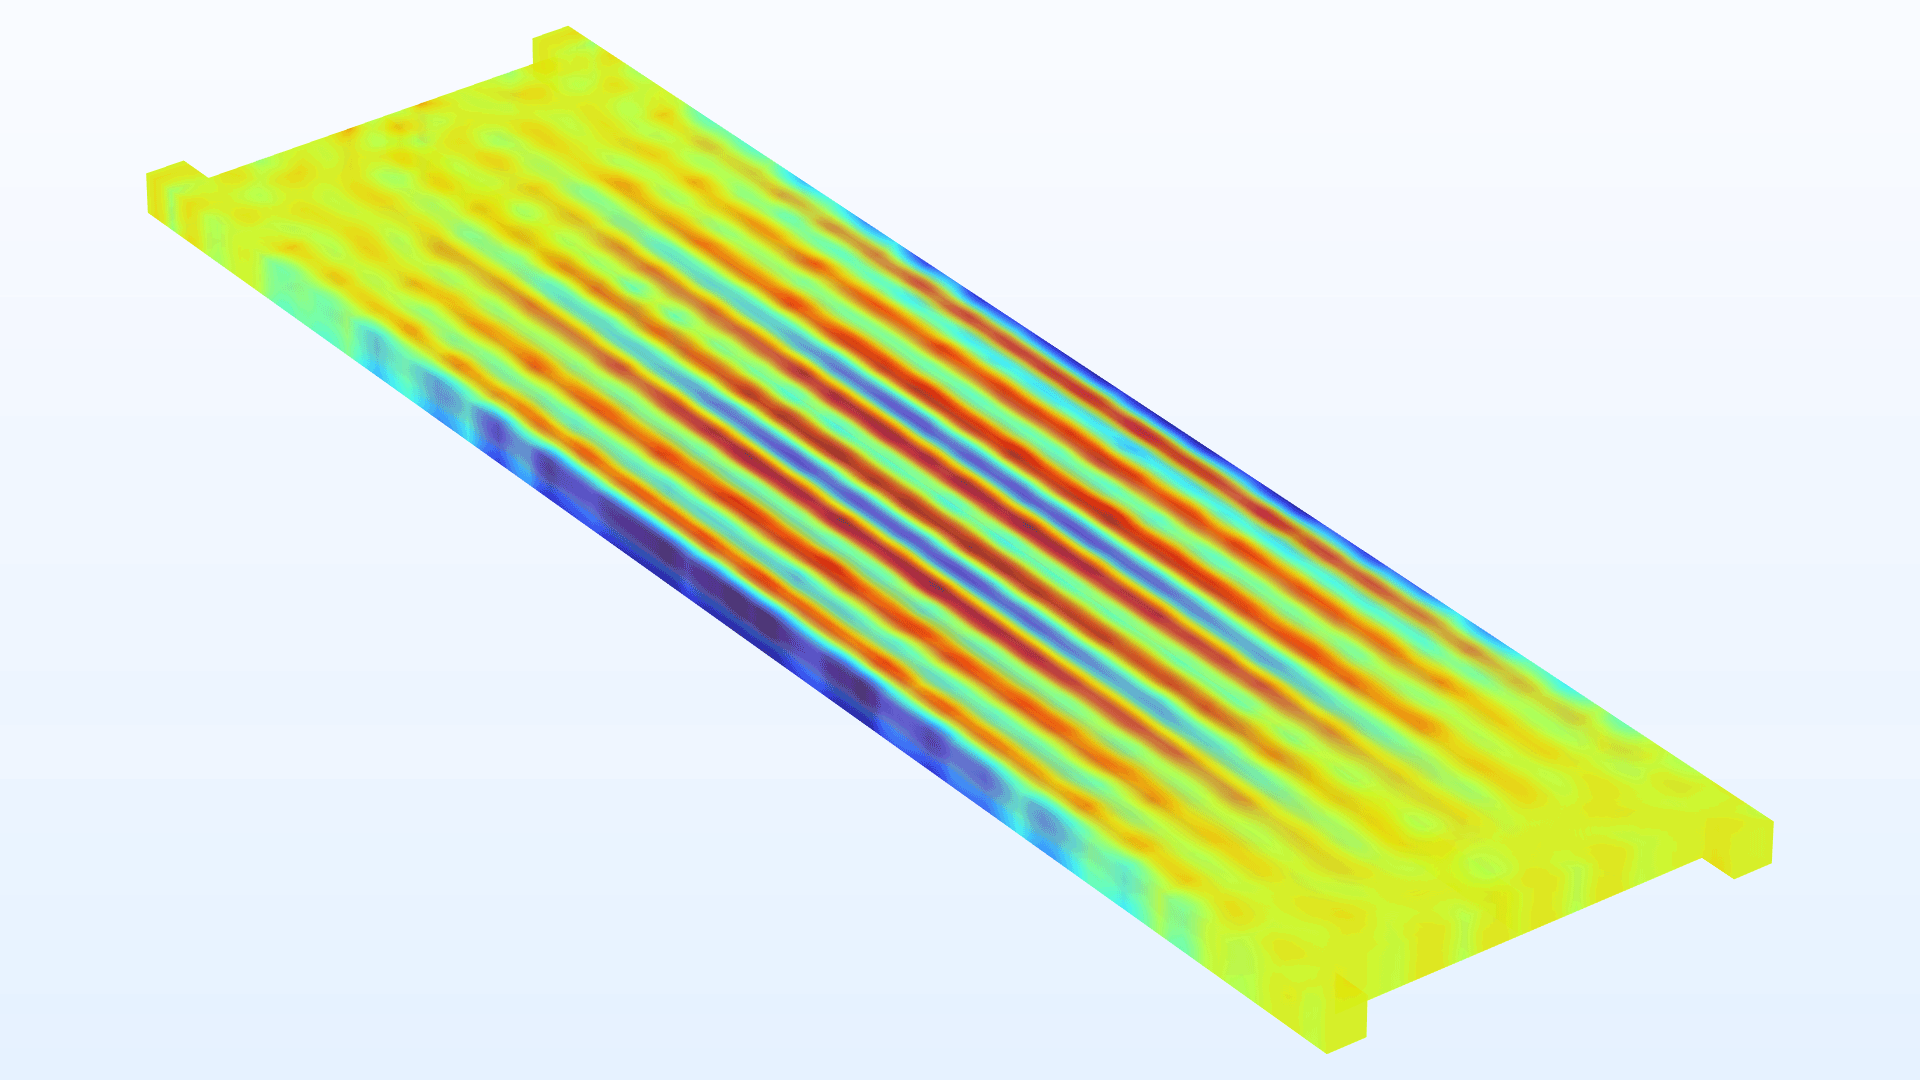 A resonator model showing the S0 mode in the Rainbow color table.